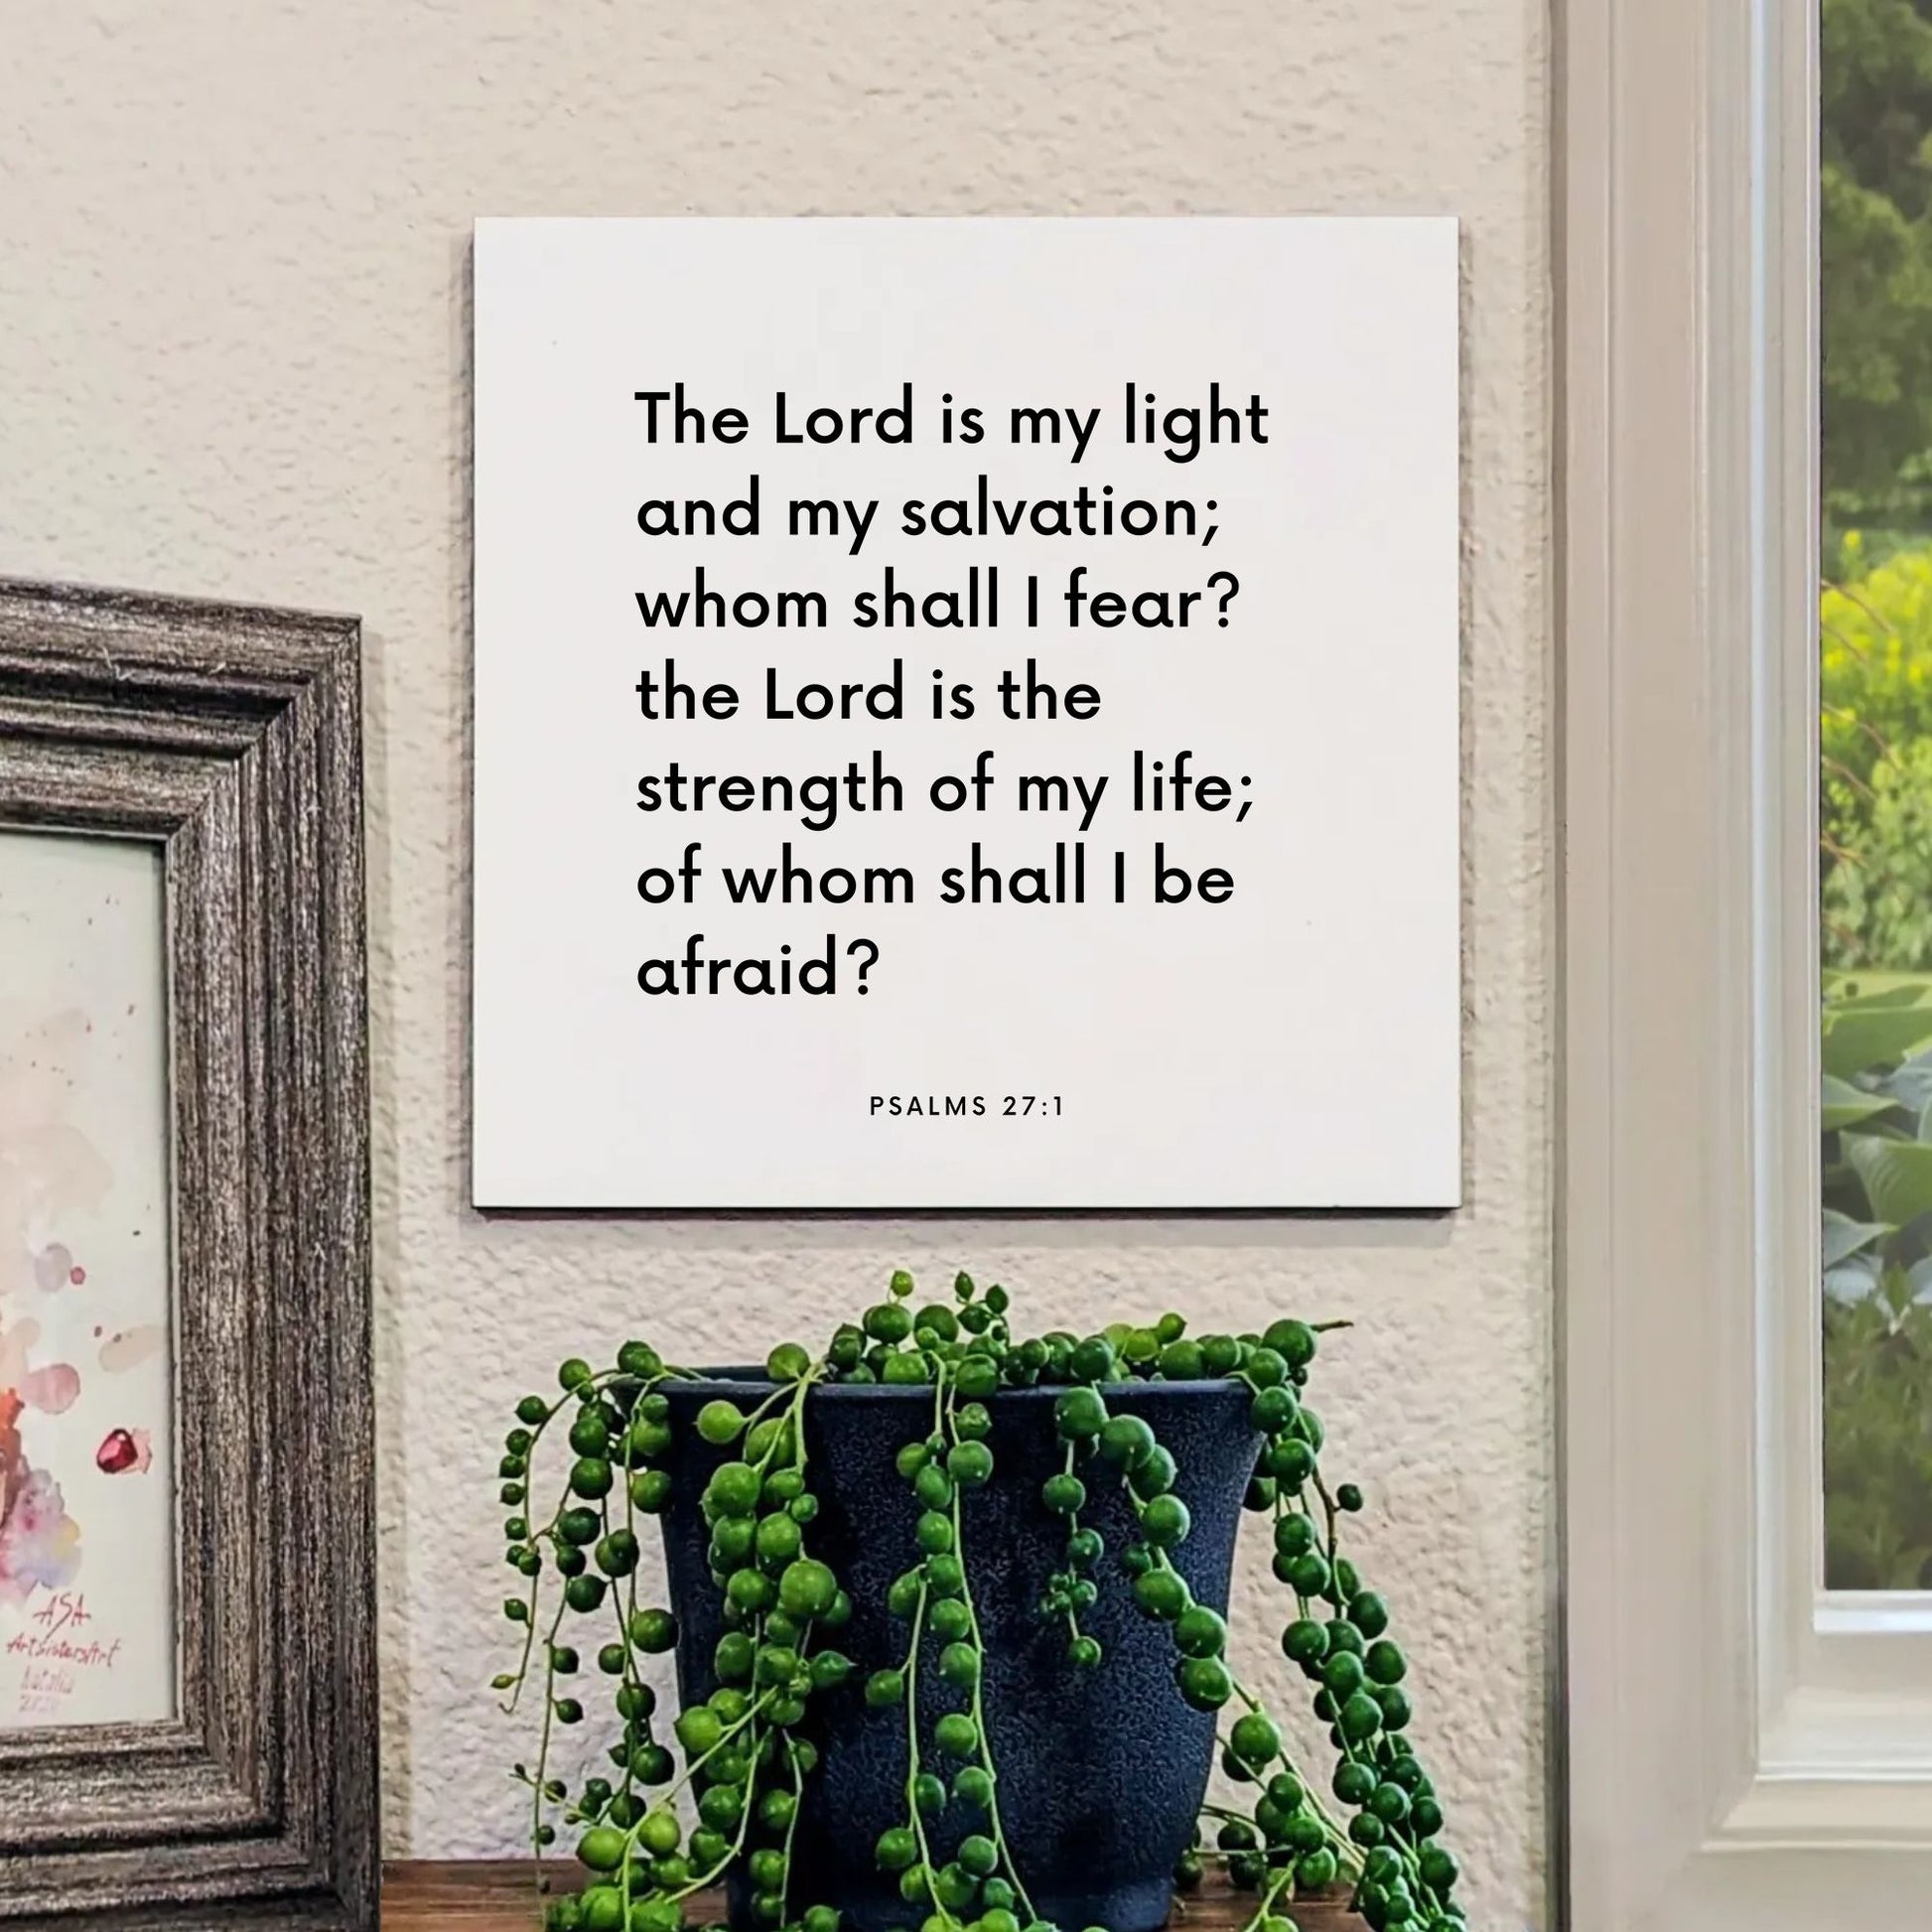 Window mouting of the scripture tile for Psalms 27:1 - "The Lord is my light and my salvation; whom shall I fear?"